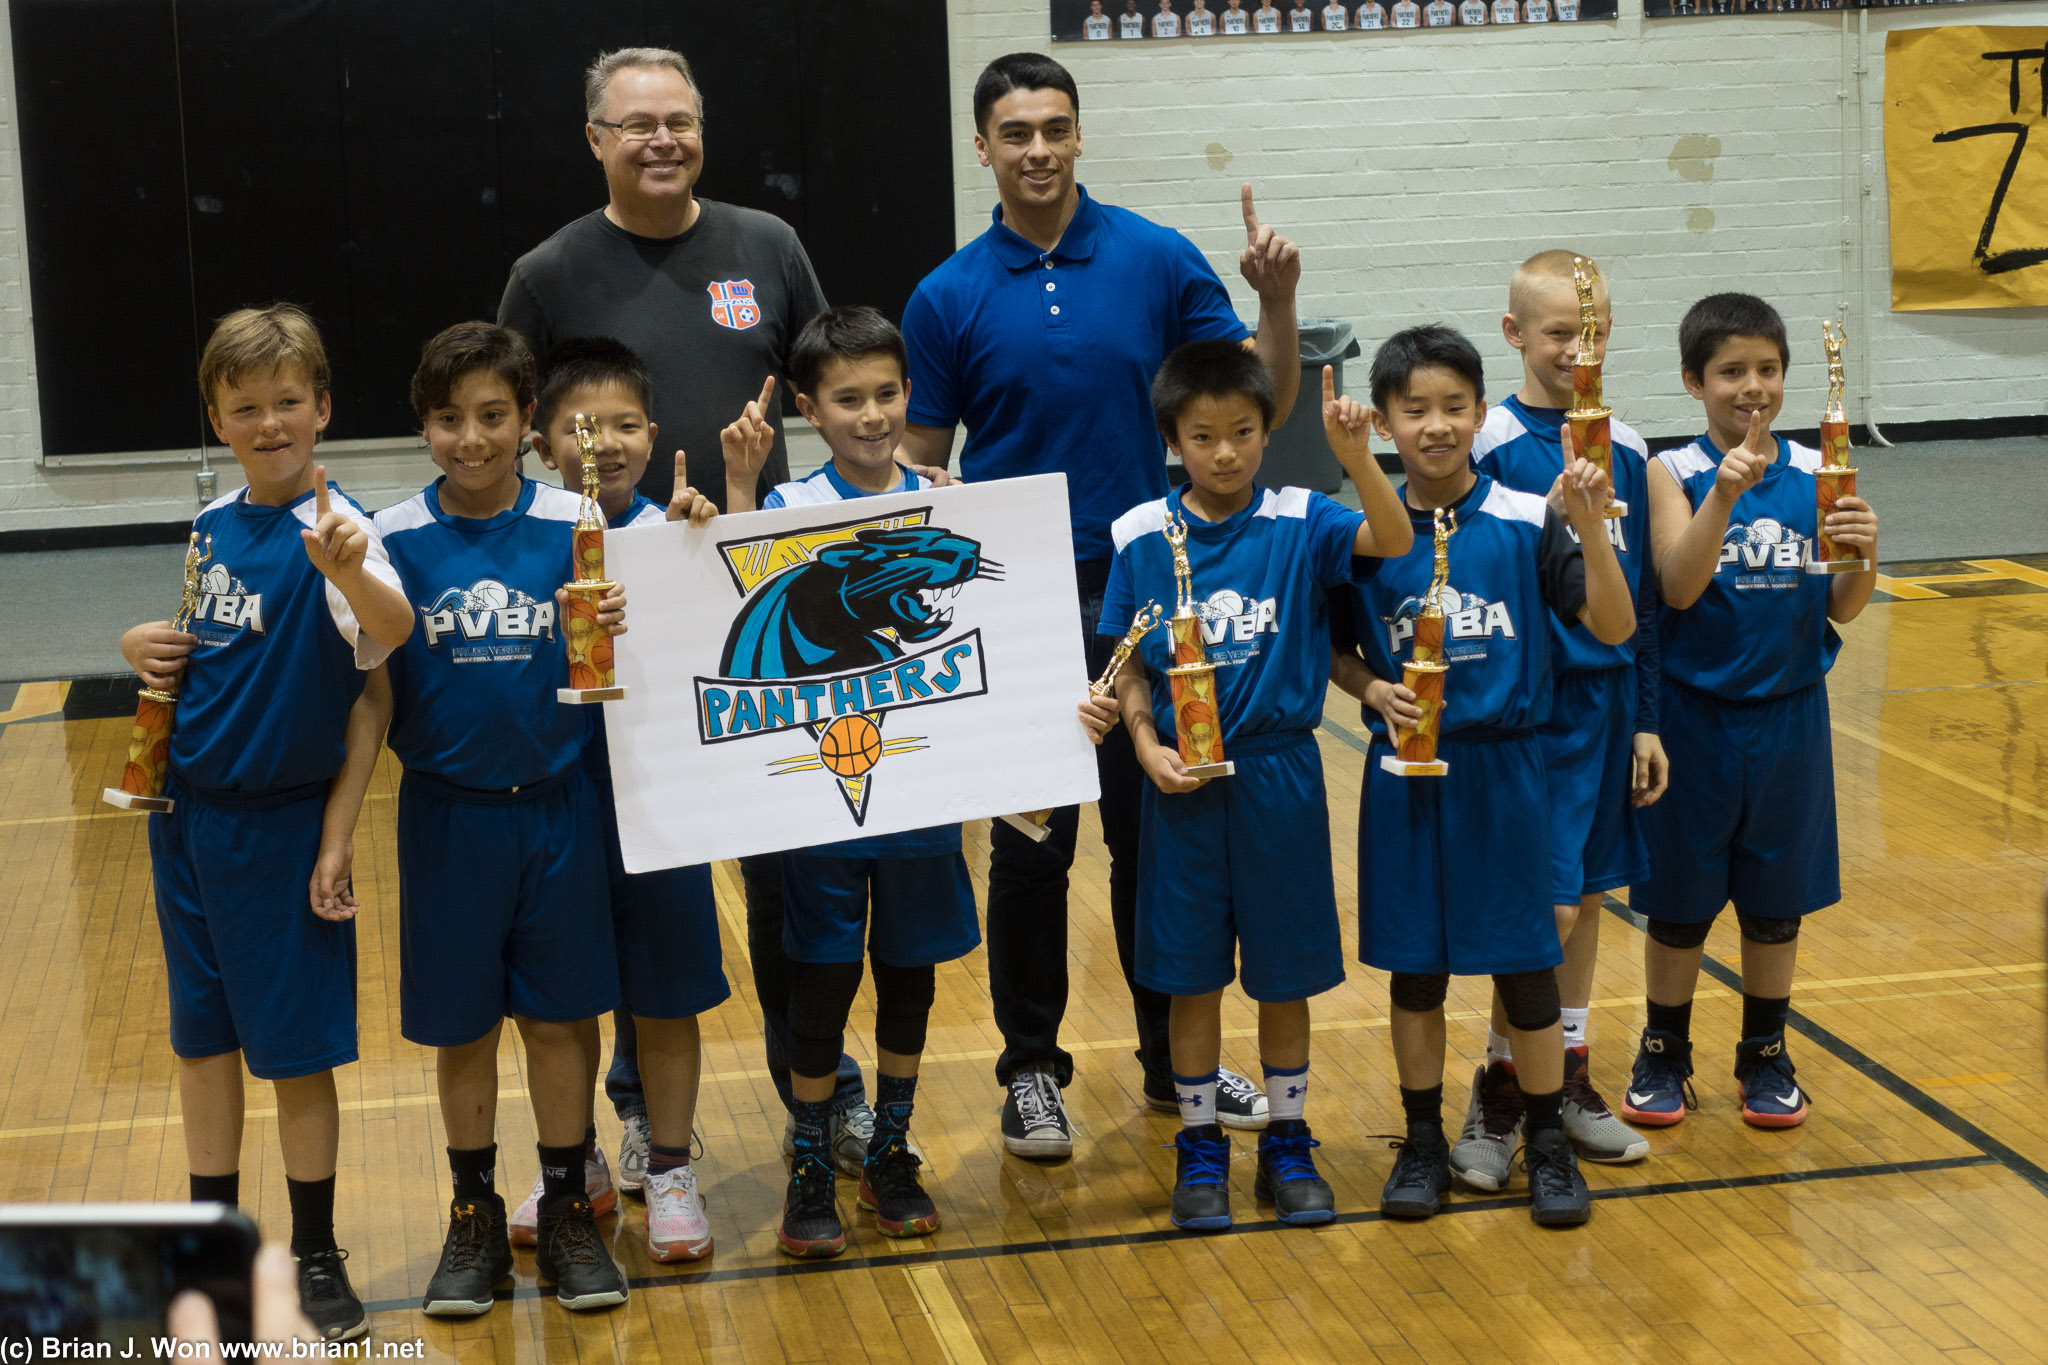 Winning 4th grade team, the Panthers!